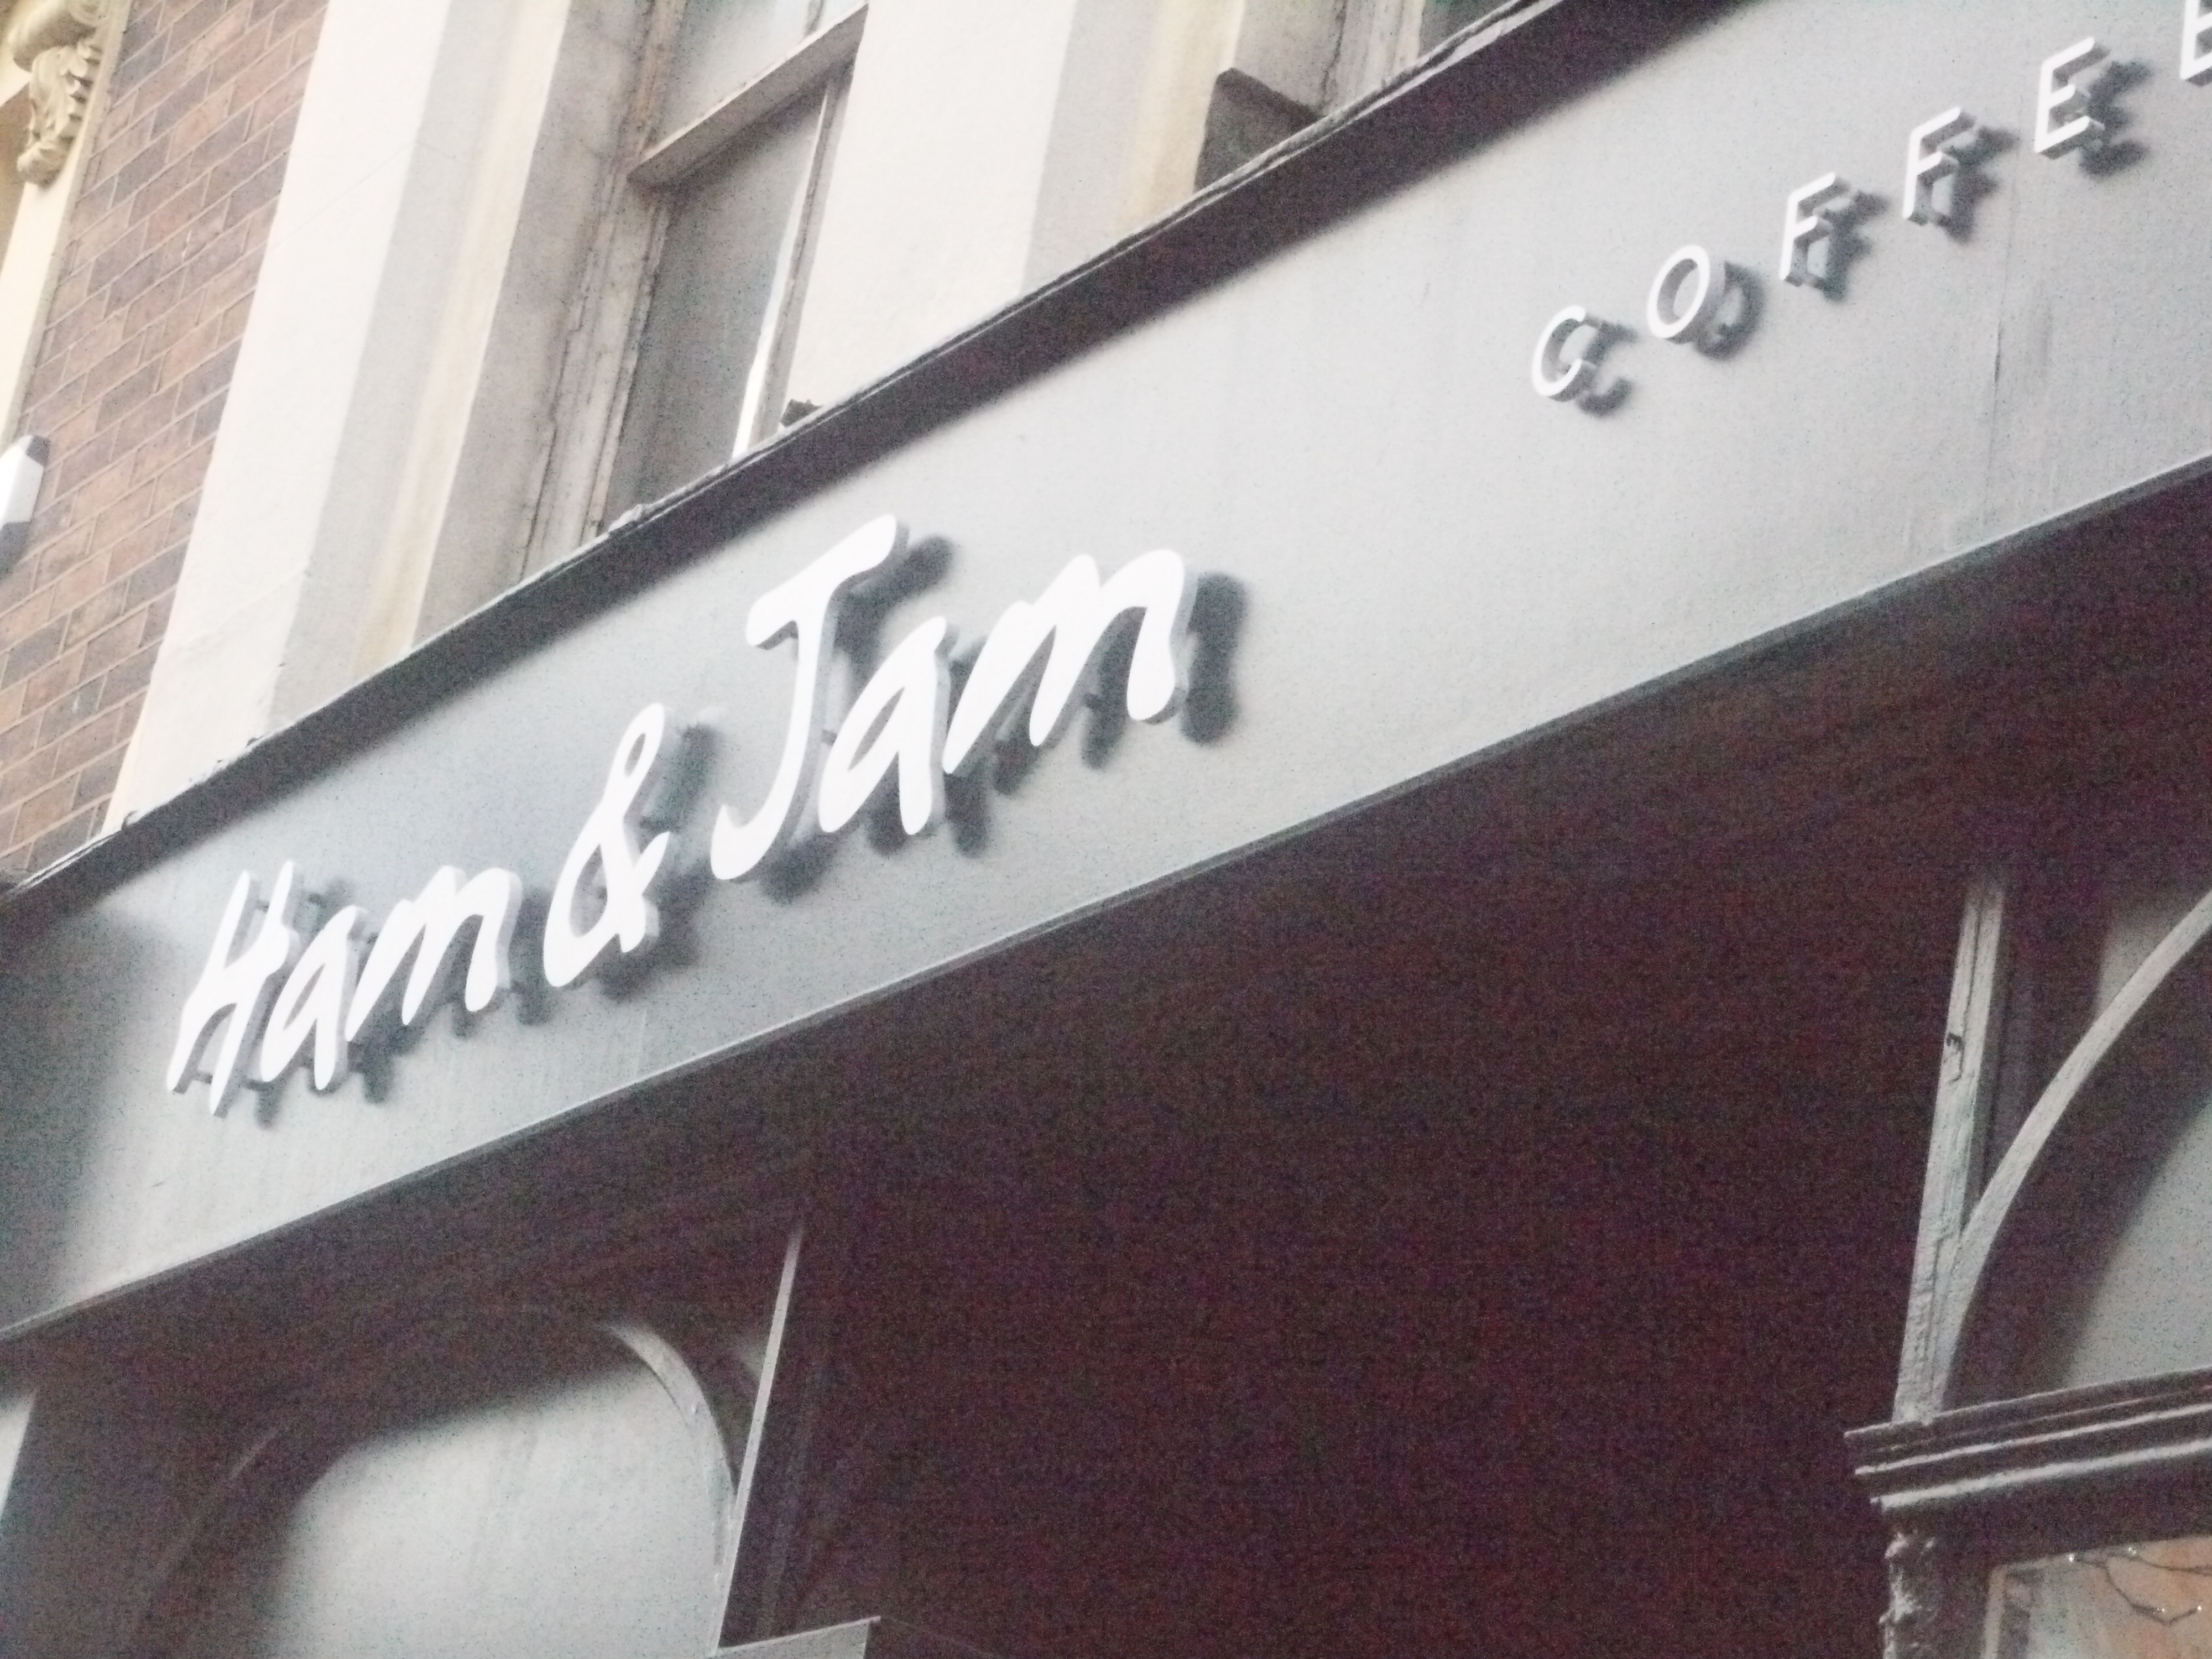 Photo taken by me – Ham And Jam Café, Preston, where this poem started life as a short story